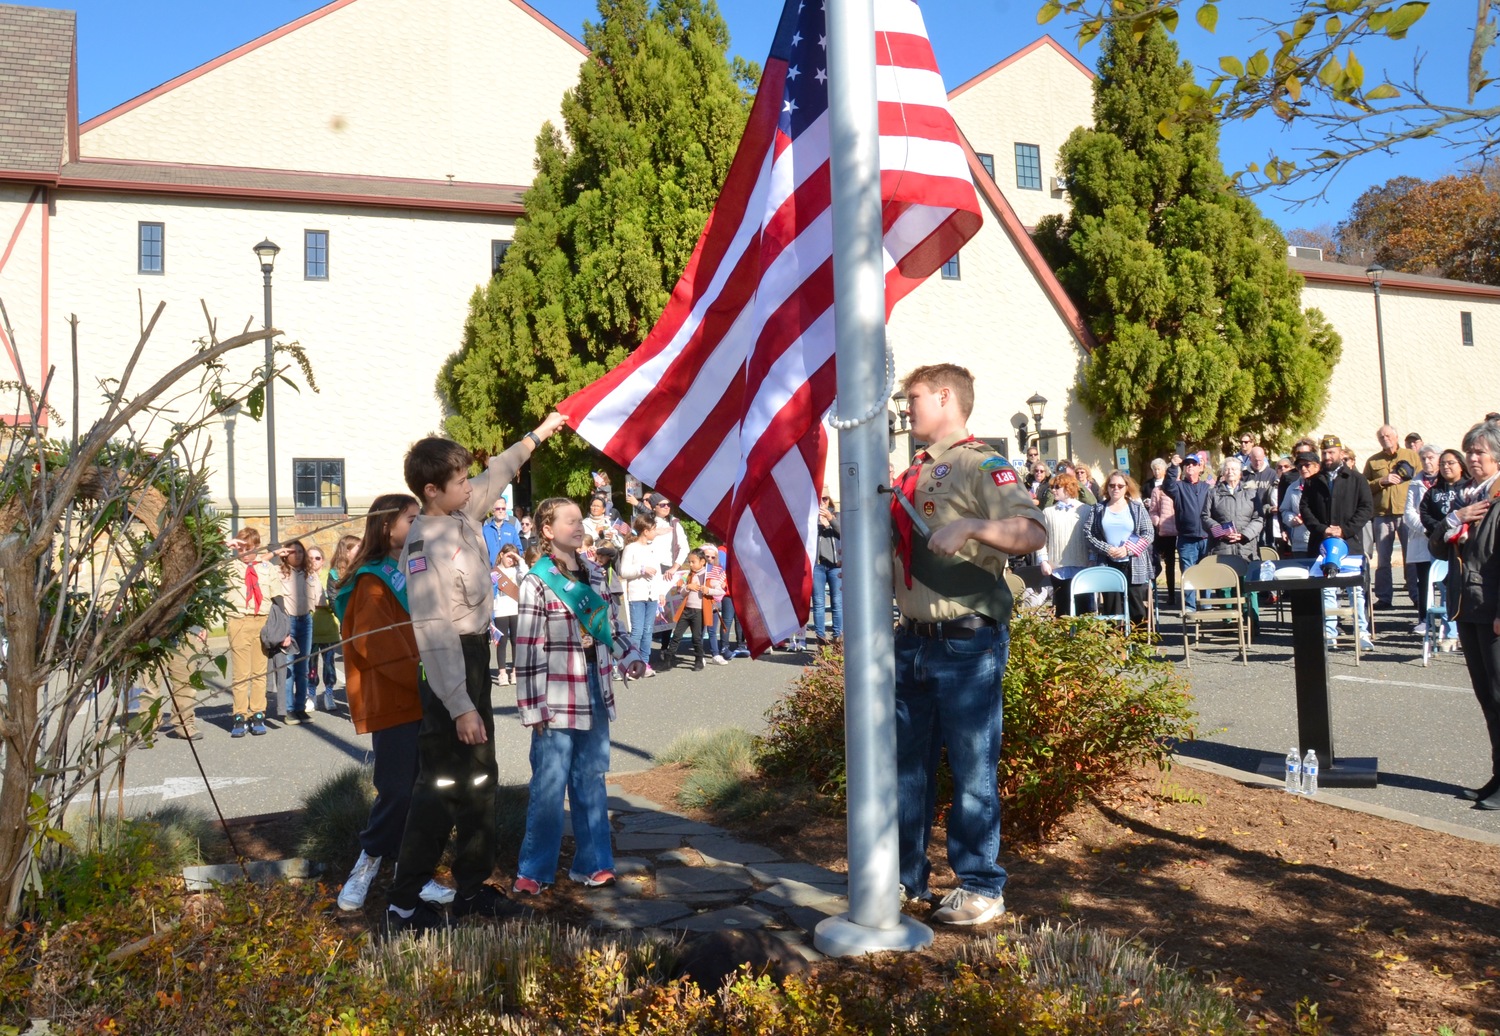 Scouts raise the flag at the The Montauk Playhouse Community Center Foundation's annual Veterans Day Flag Raising Ceremony on Saturday.  KYRIL BROMLEY